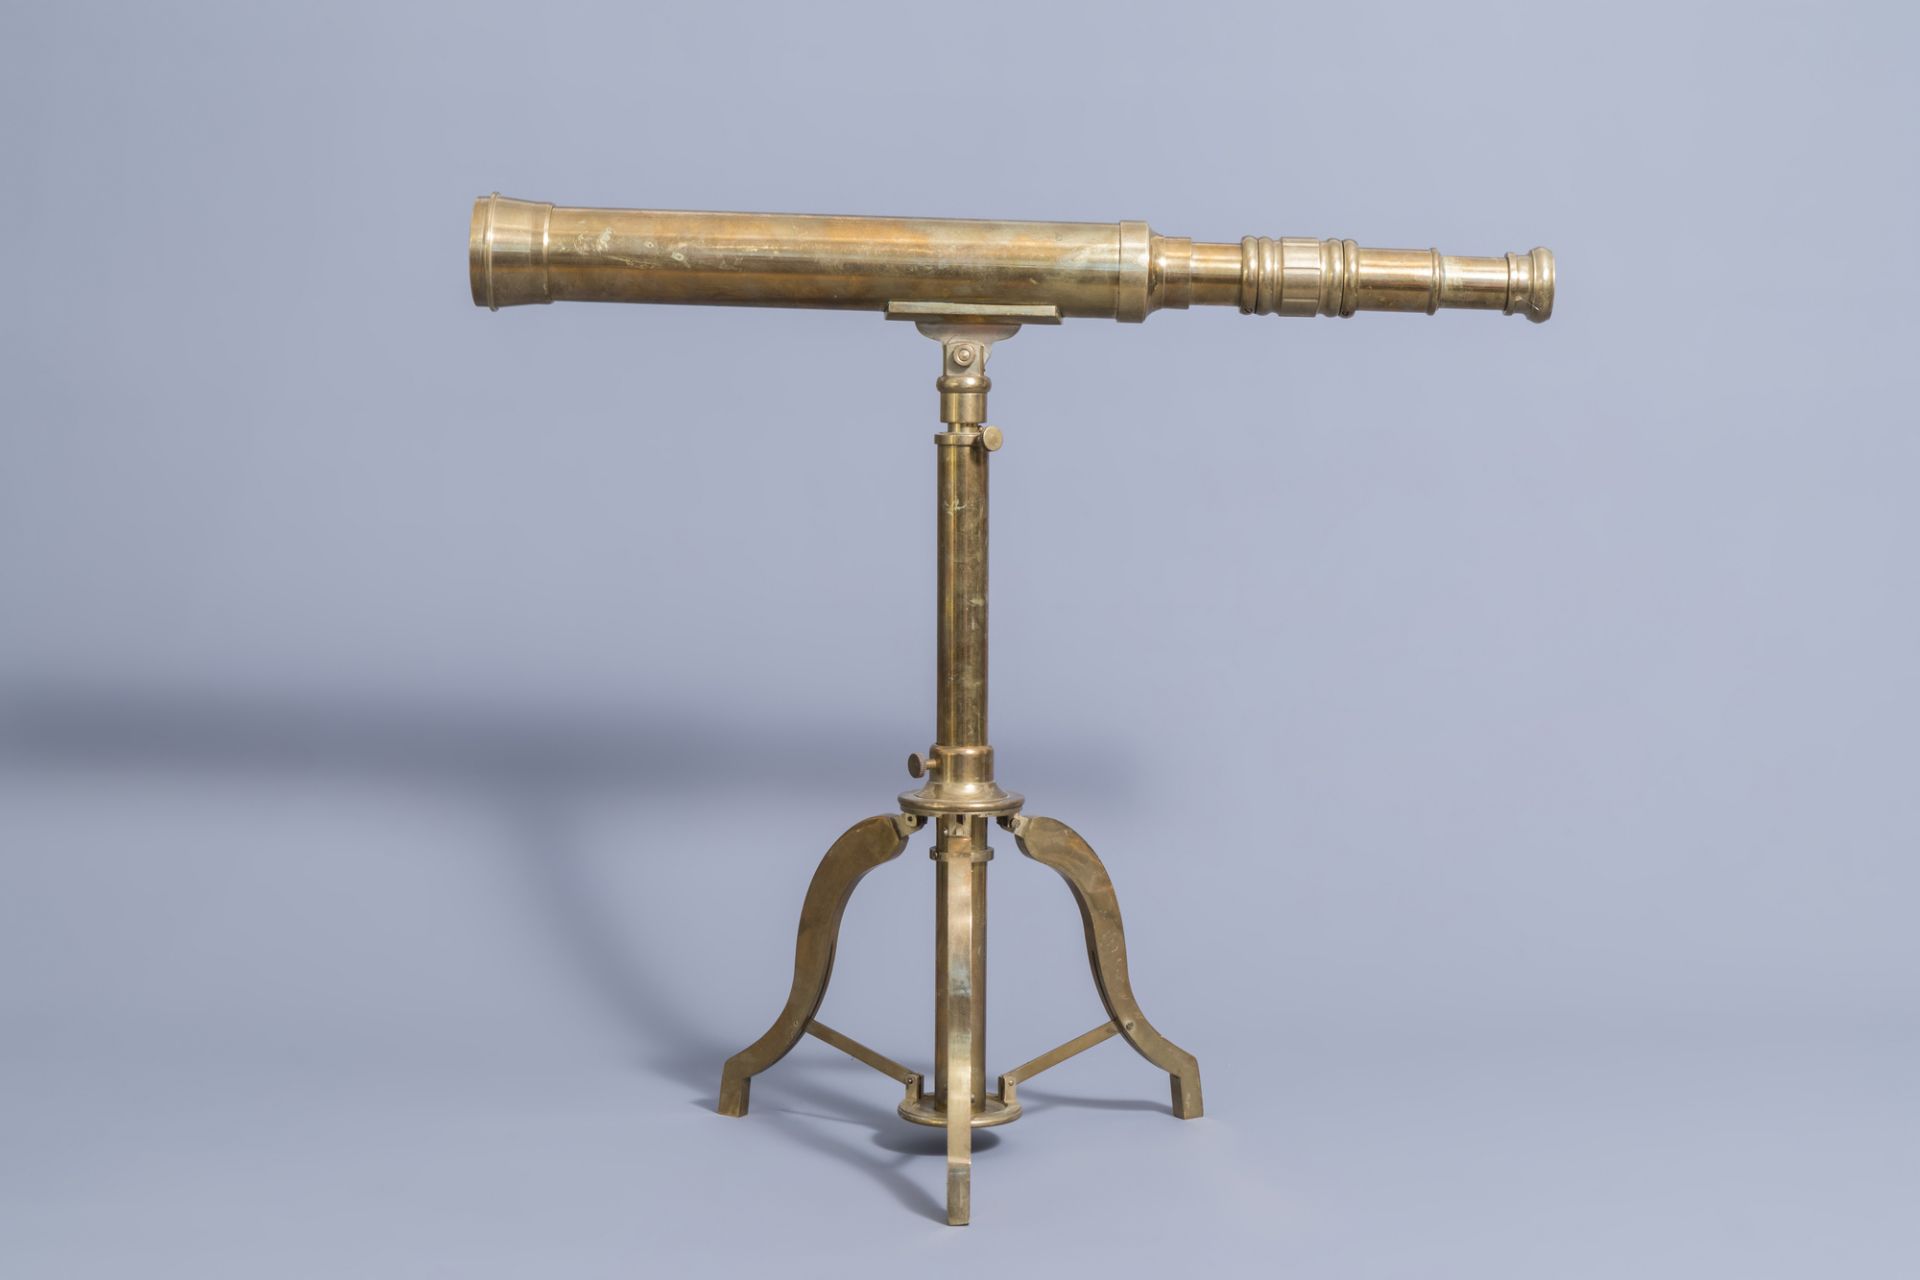 An English Stanley London brass telescope on a tripod stand, 20th C. - Image 4 of 8